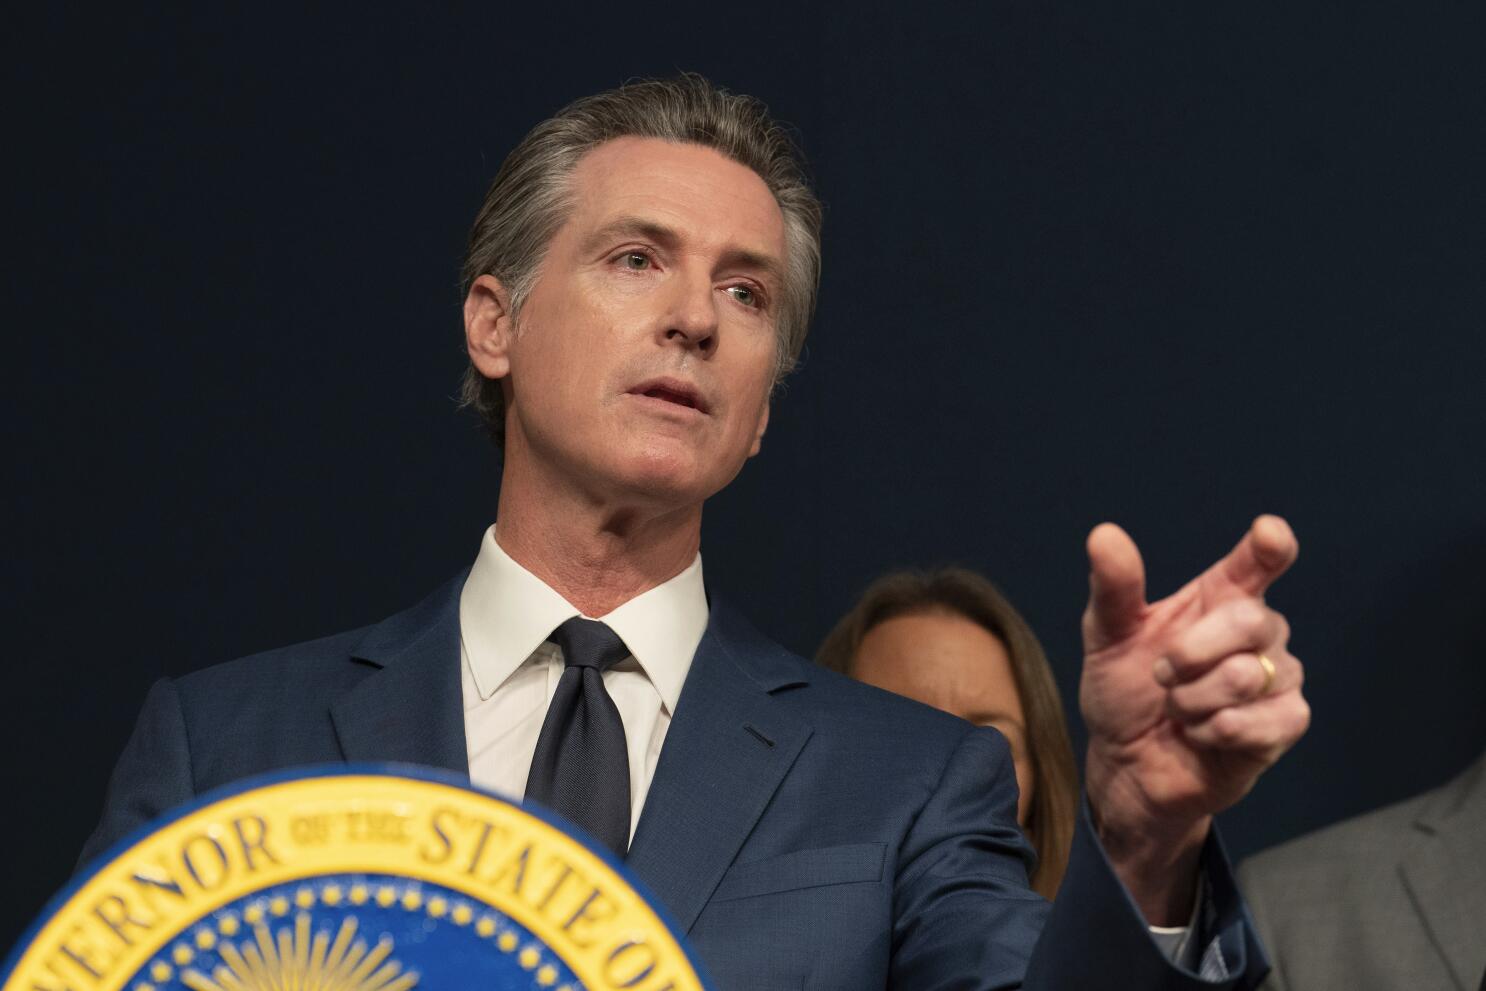 California Governor Accelerates Funding for Mental Health Treatment Centers